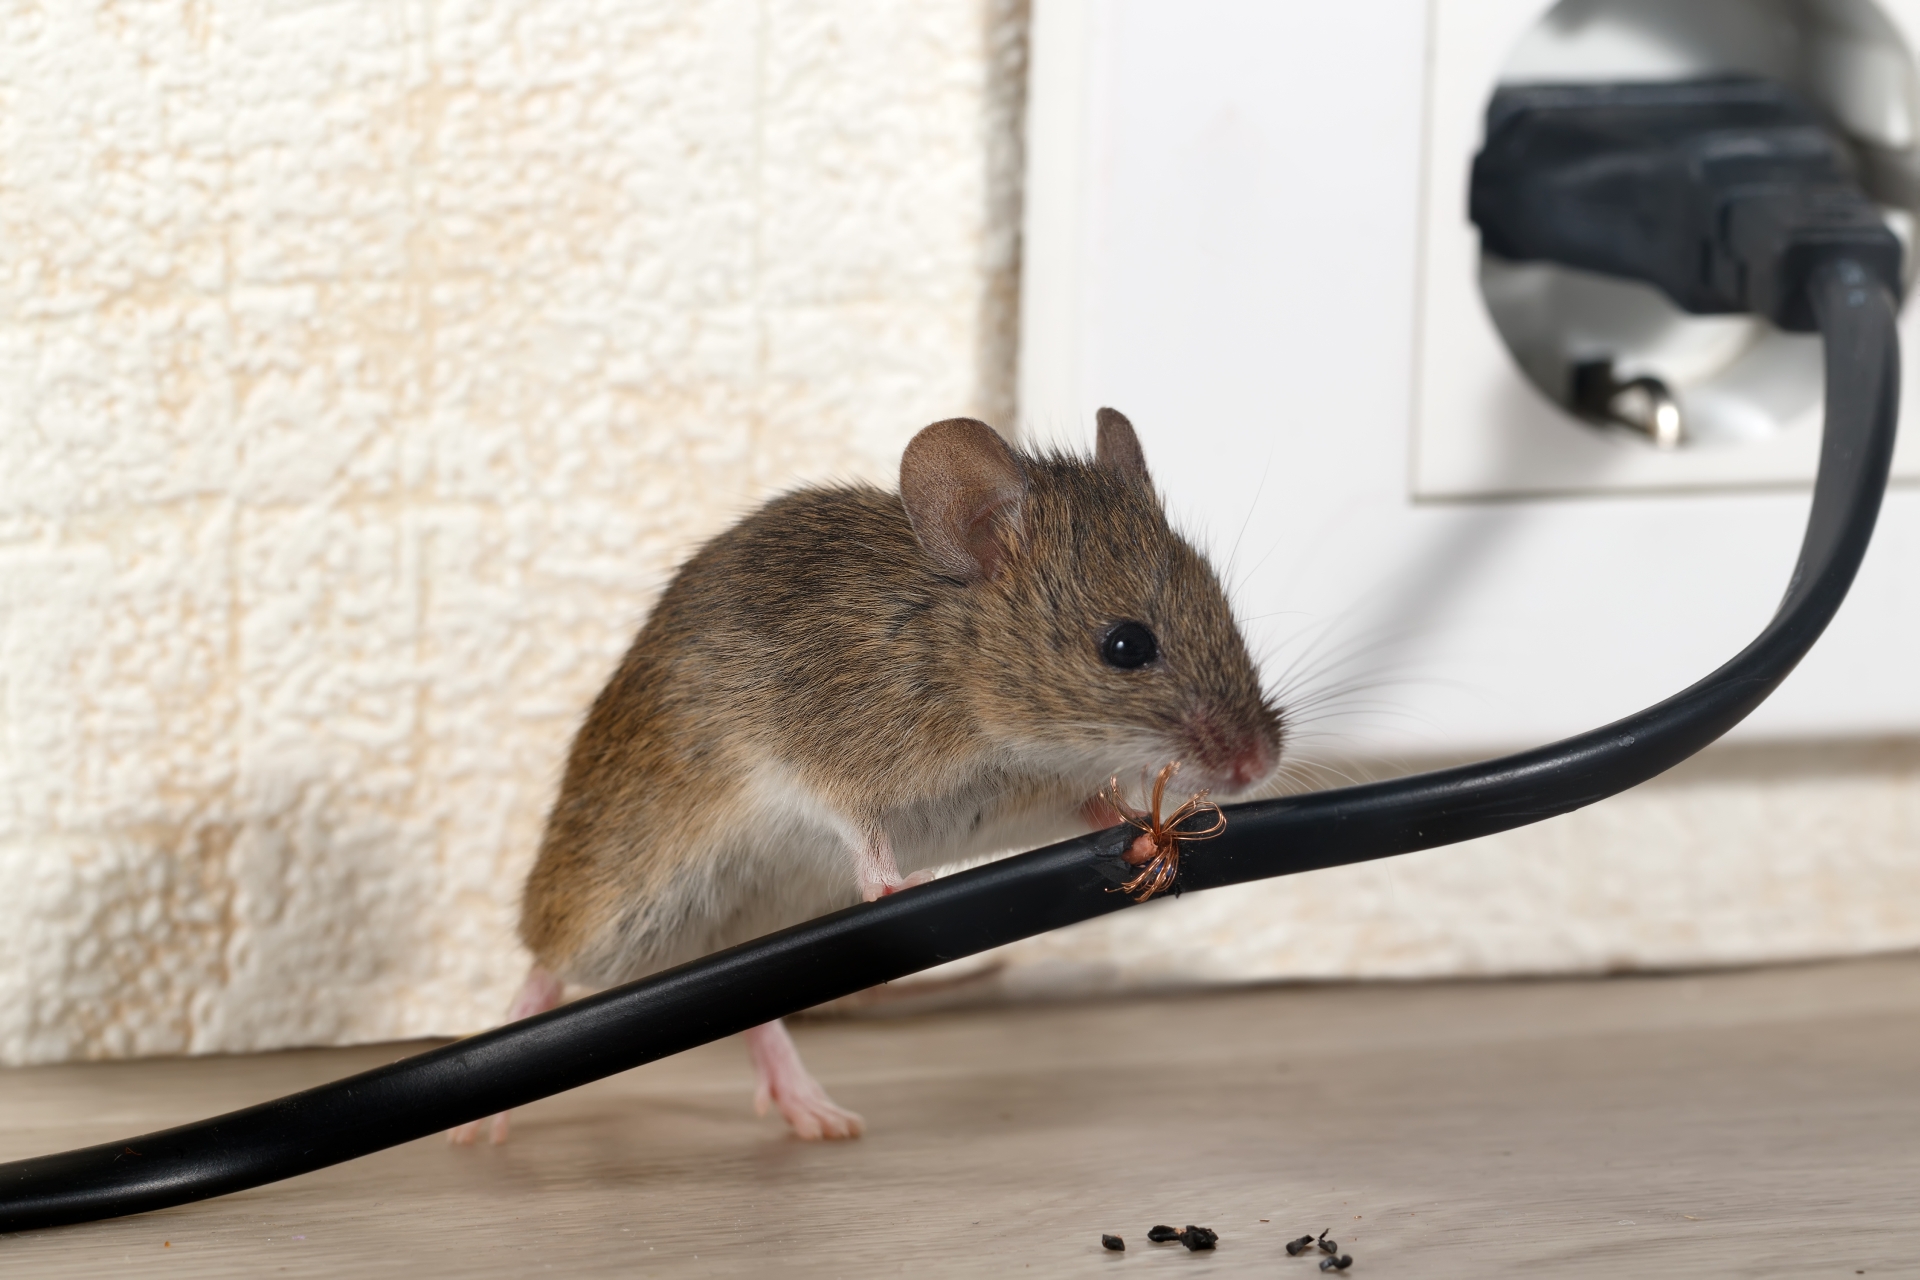 Mice Infestation, Pest Control in Battersea, SW11 . Call Now 020 8166 9746